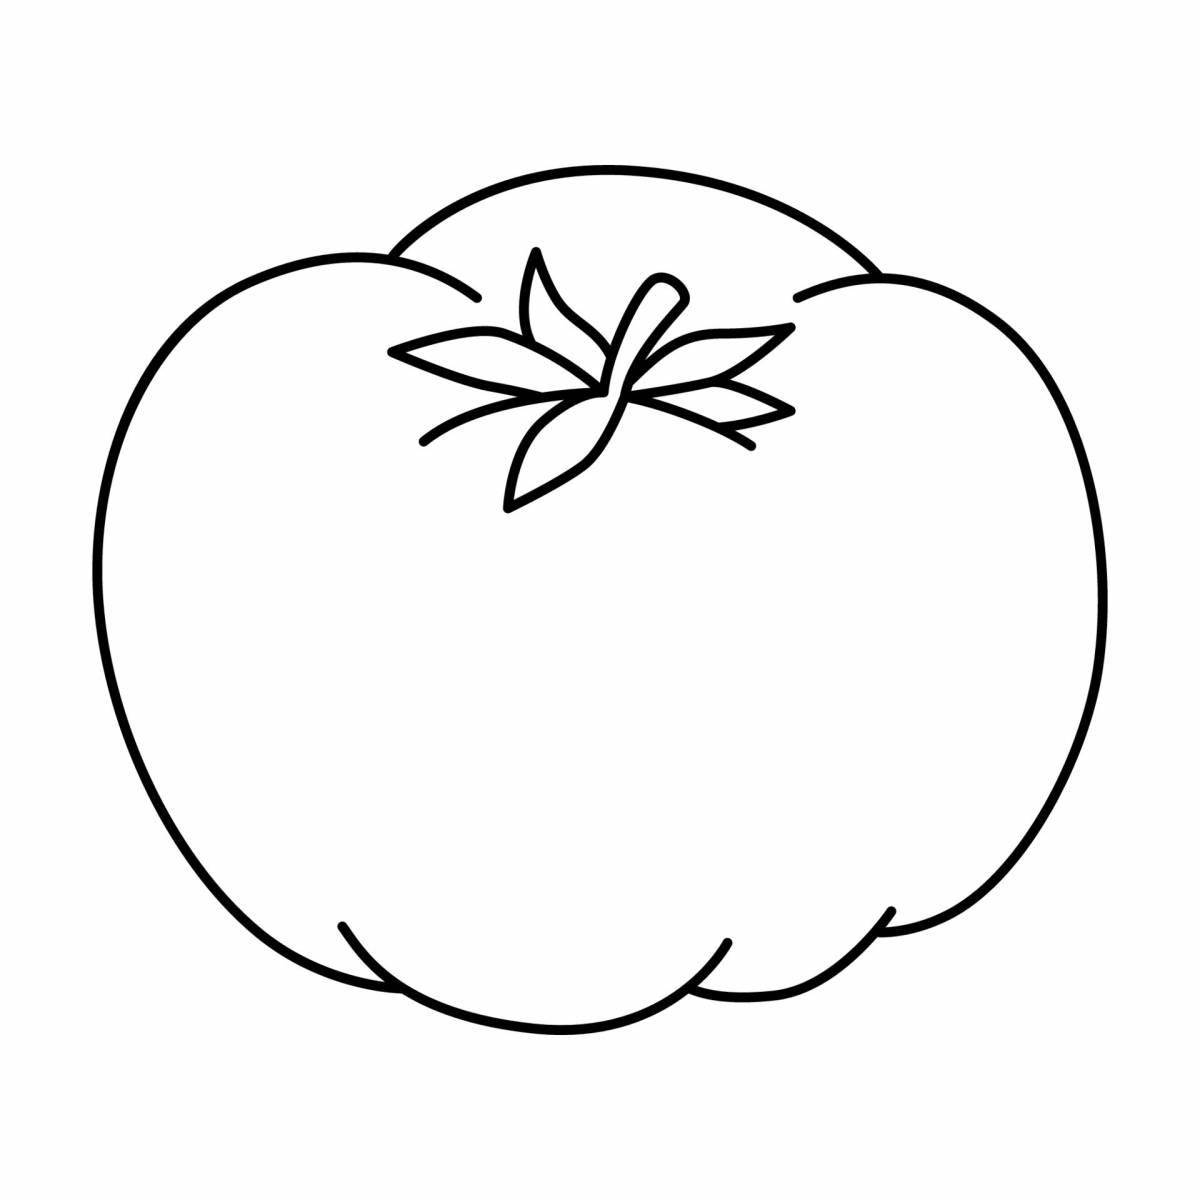 Fancy tomato coloring book for 2-3 year olds